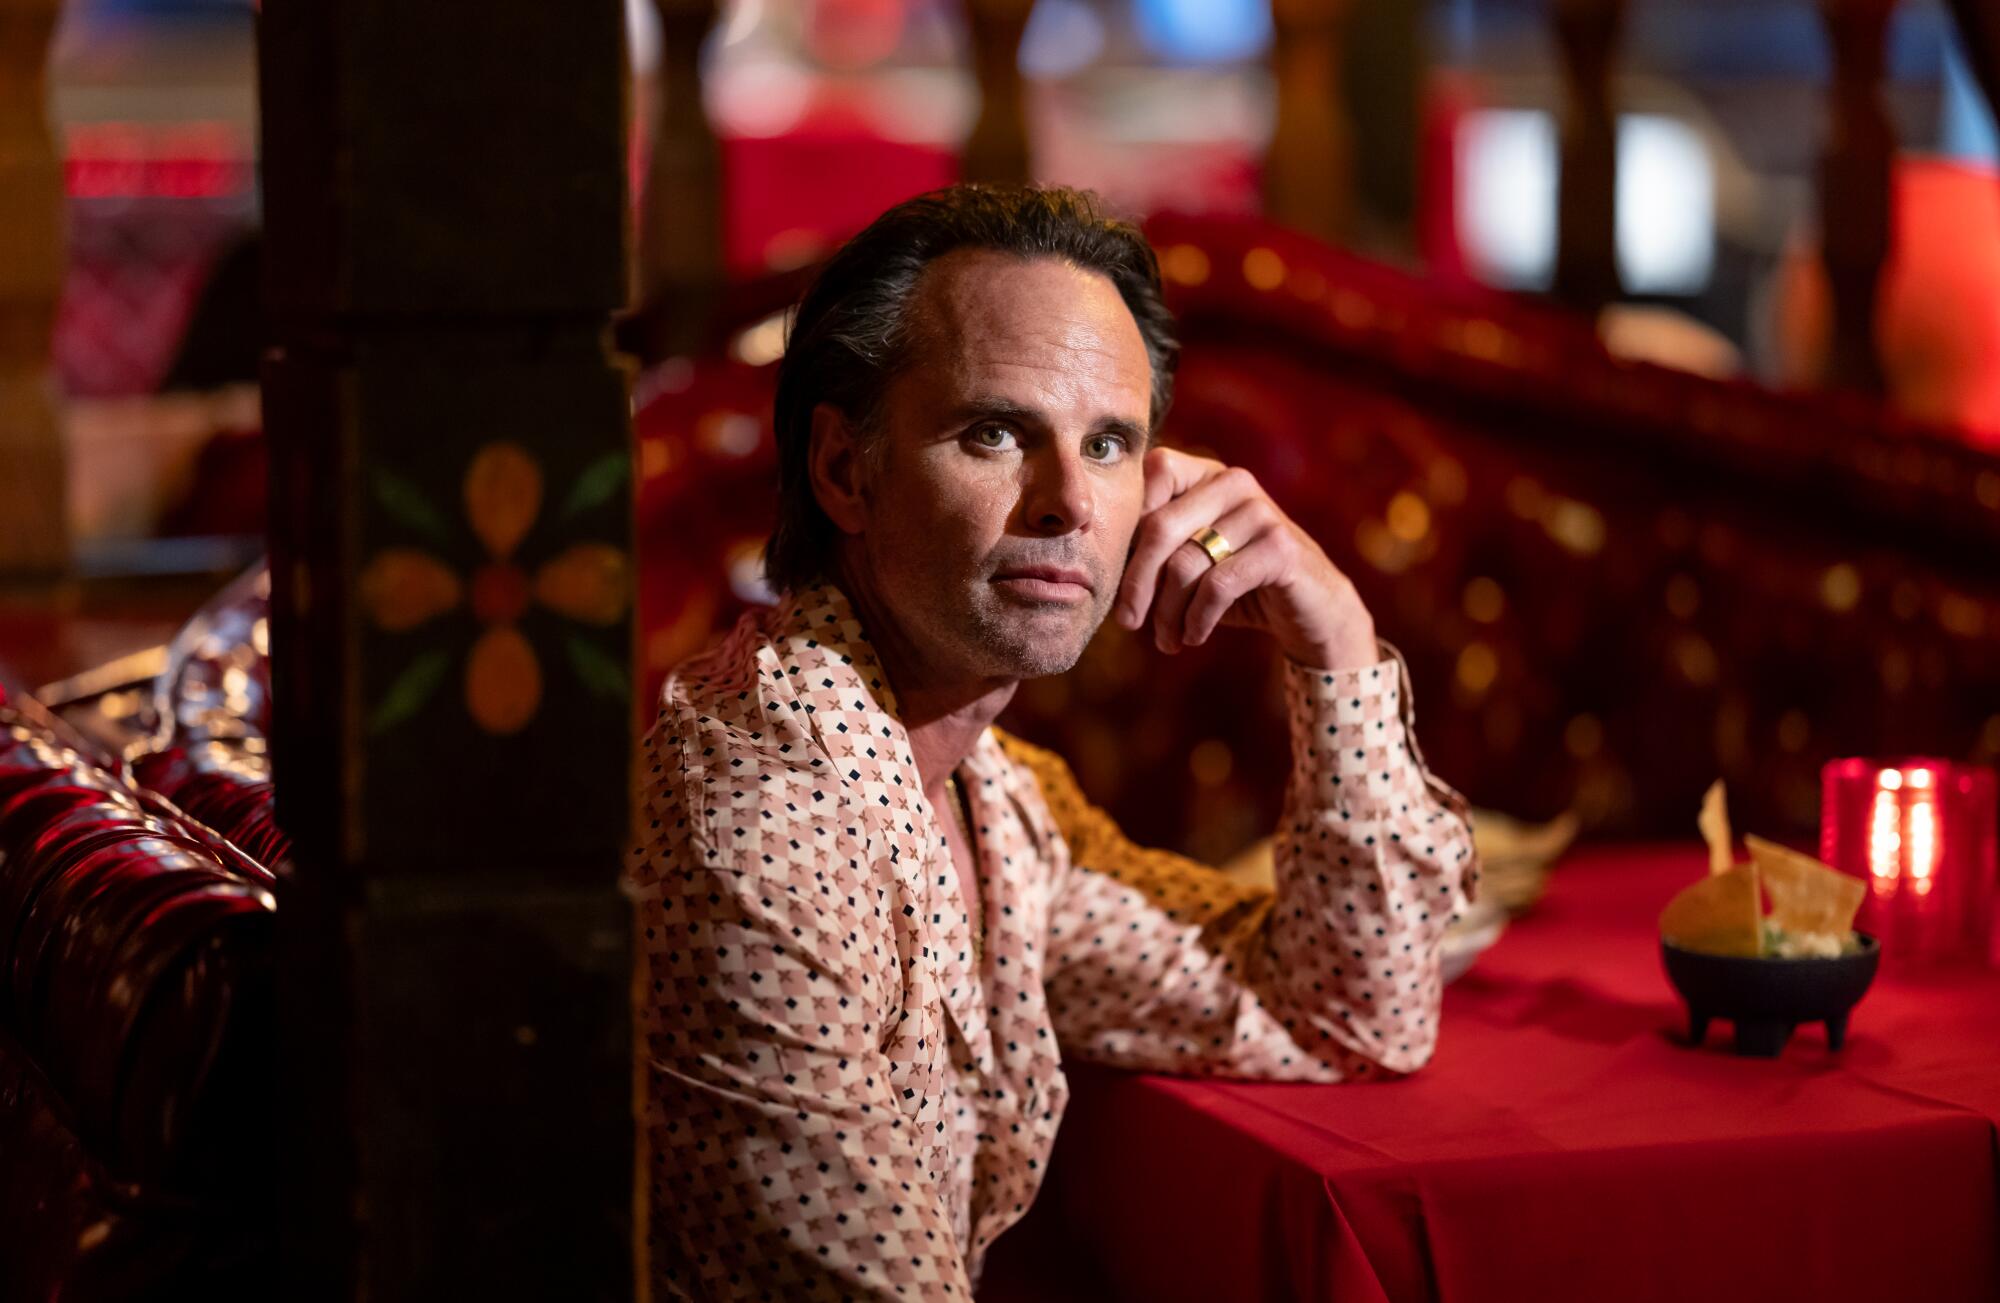 Walton Goggins sitting and resting his arm on a table.